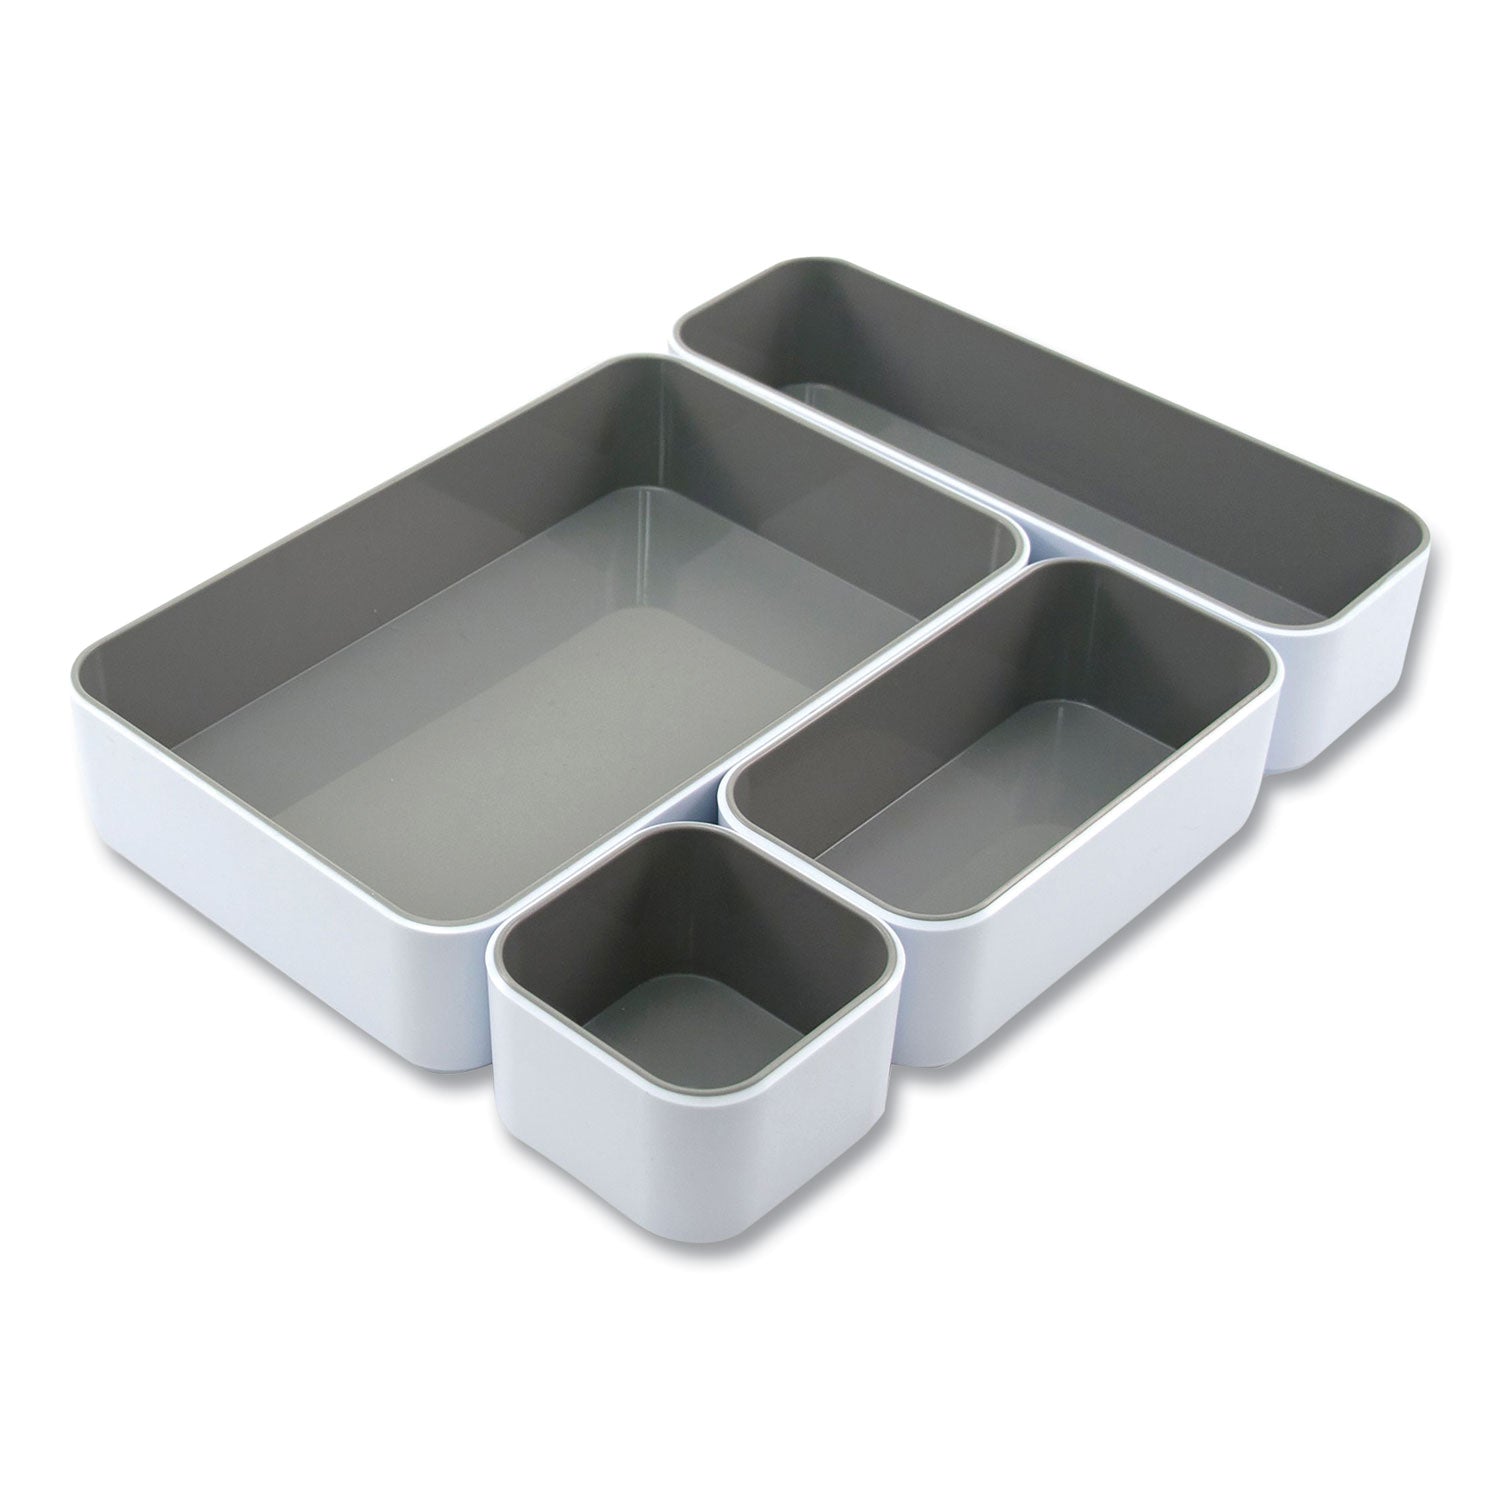 fusion-stacking-bins-4-compartments-plastic-121-x-91-x-22-white-gray-4-pieces_avt37592 - 3